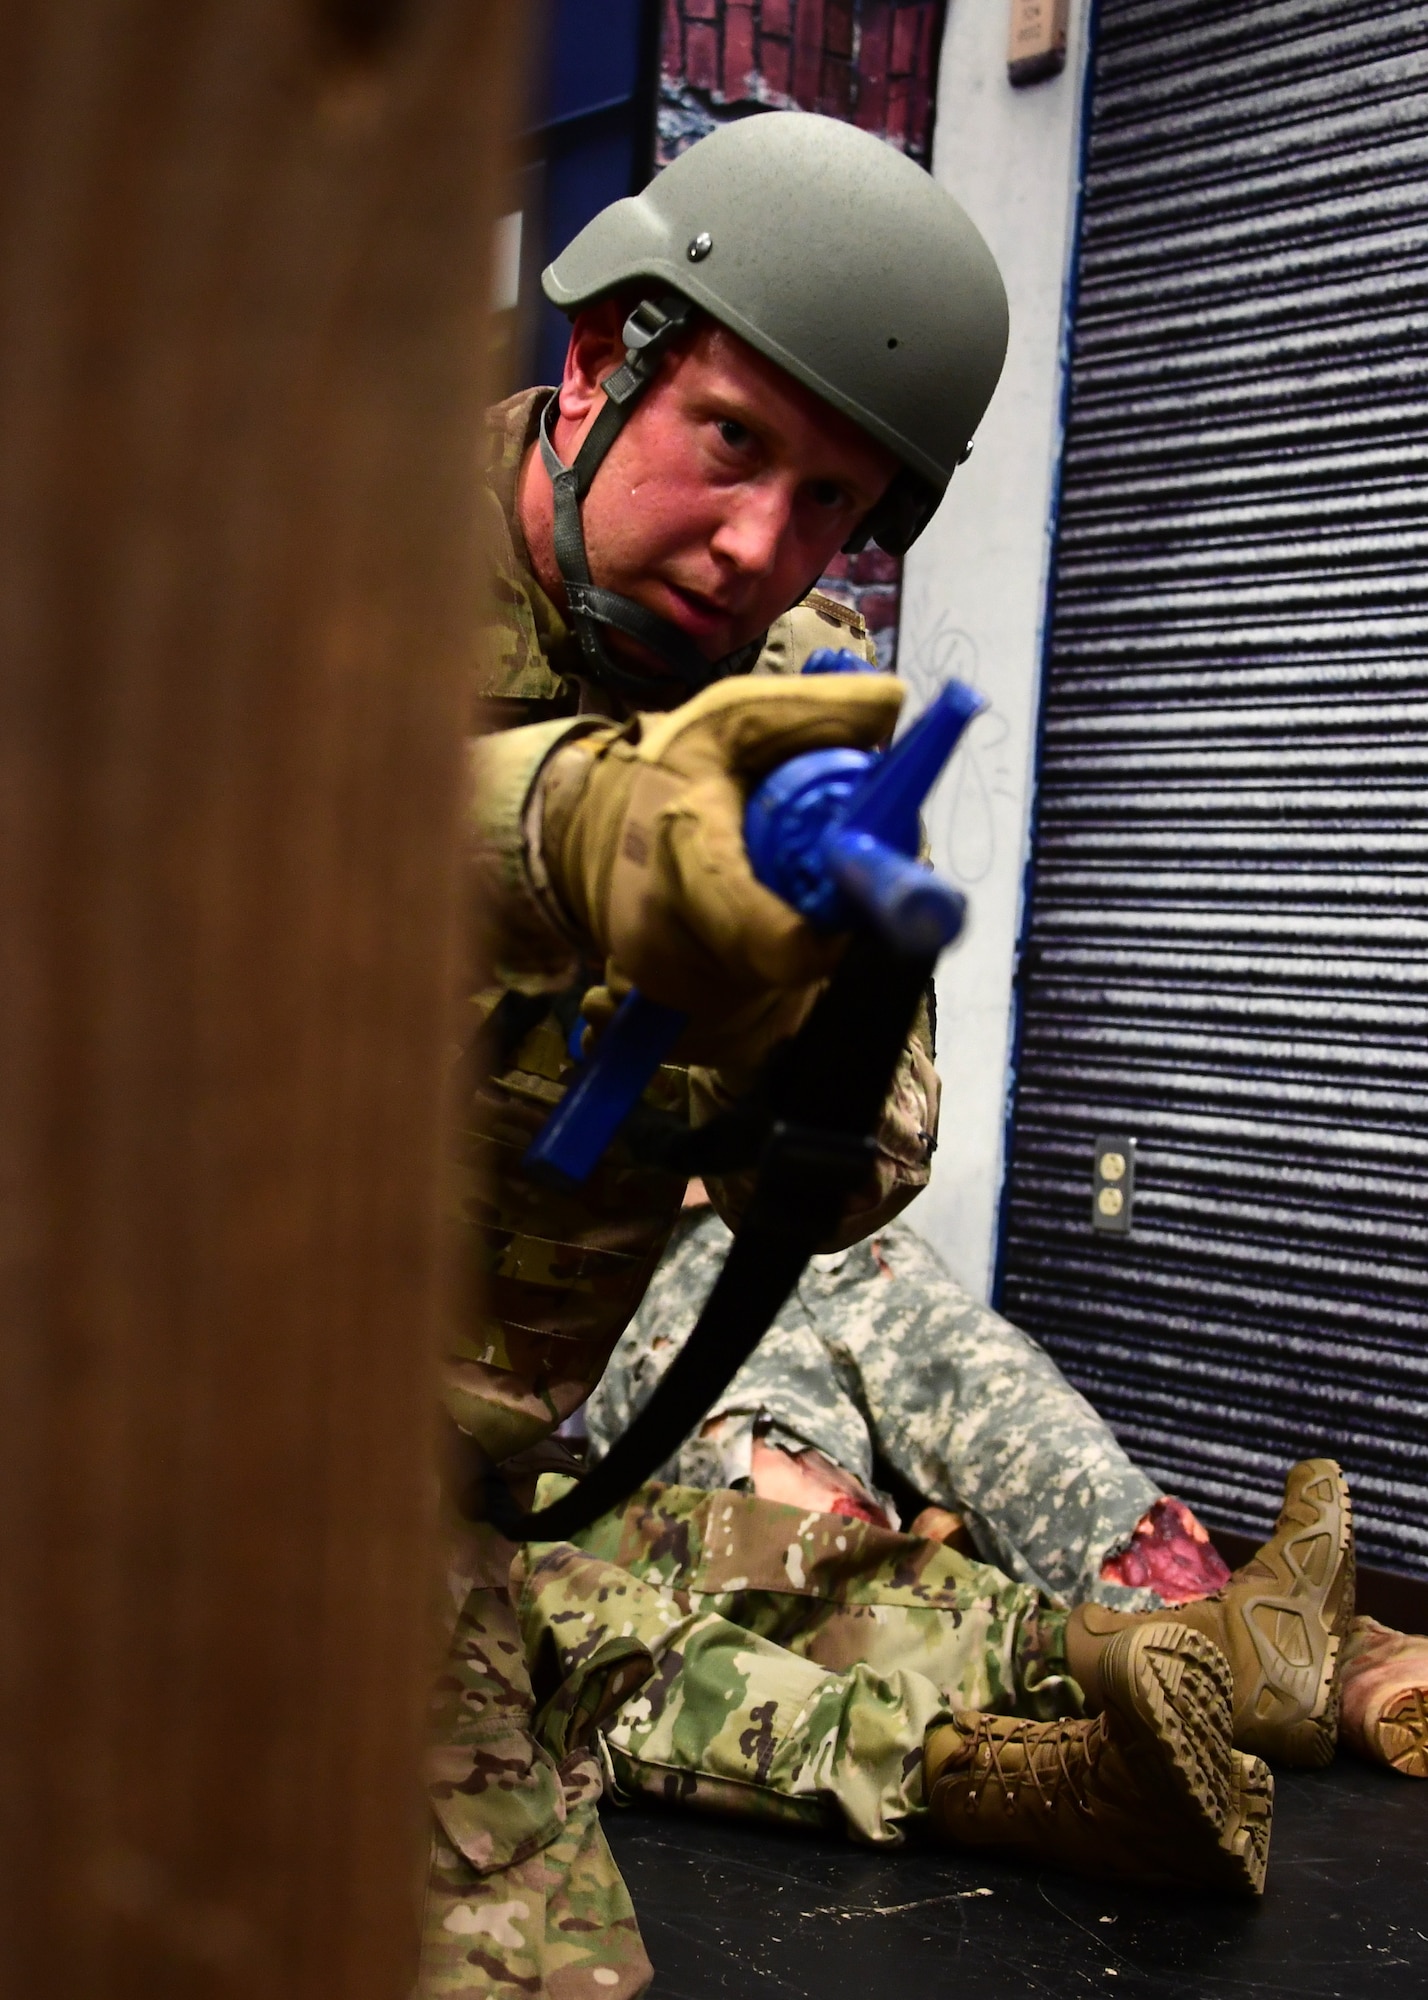 Senior Master Sgt. David Miller, functional manager with the911th Aeromedical Staging Squadron, provides cover in a simulation at Fort Indiantown Gap, Pennsylvania, June 19, 2019. During the simulation, the instructors performed a scenario similar to one the students would be in the next day in order to better prepare them for the training. (U.S. Air Force photo by Senior Airman Grace Thomson)